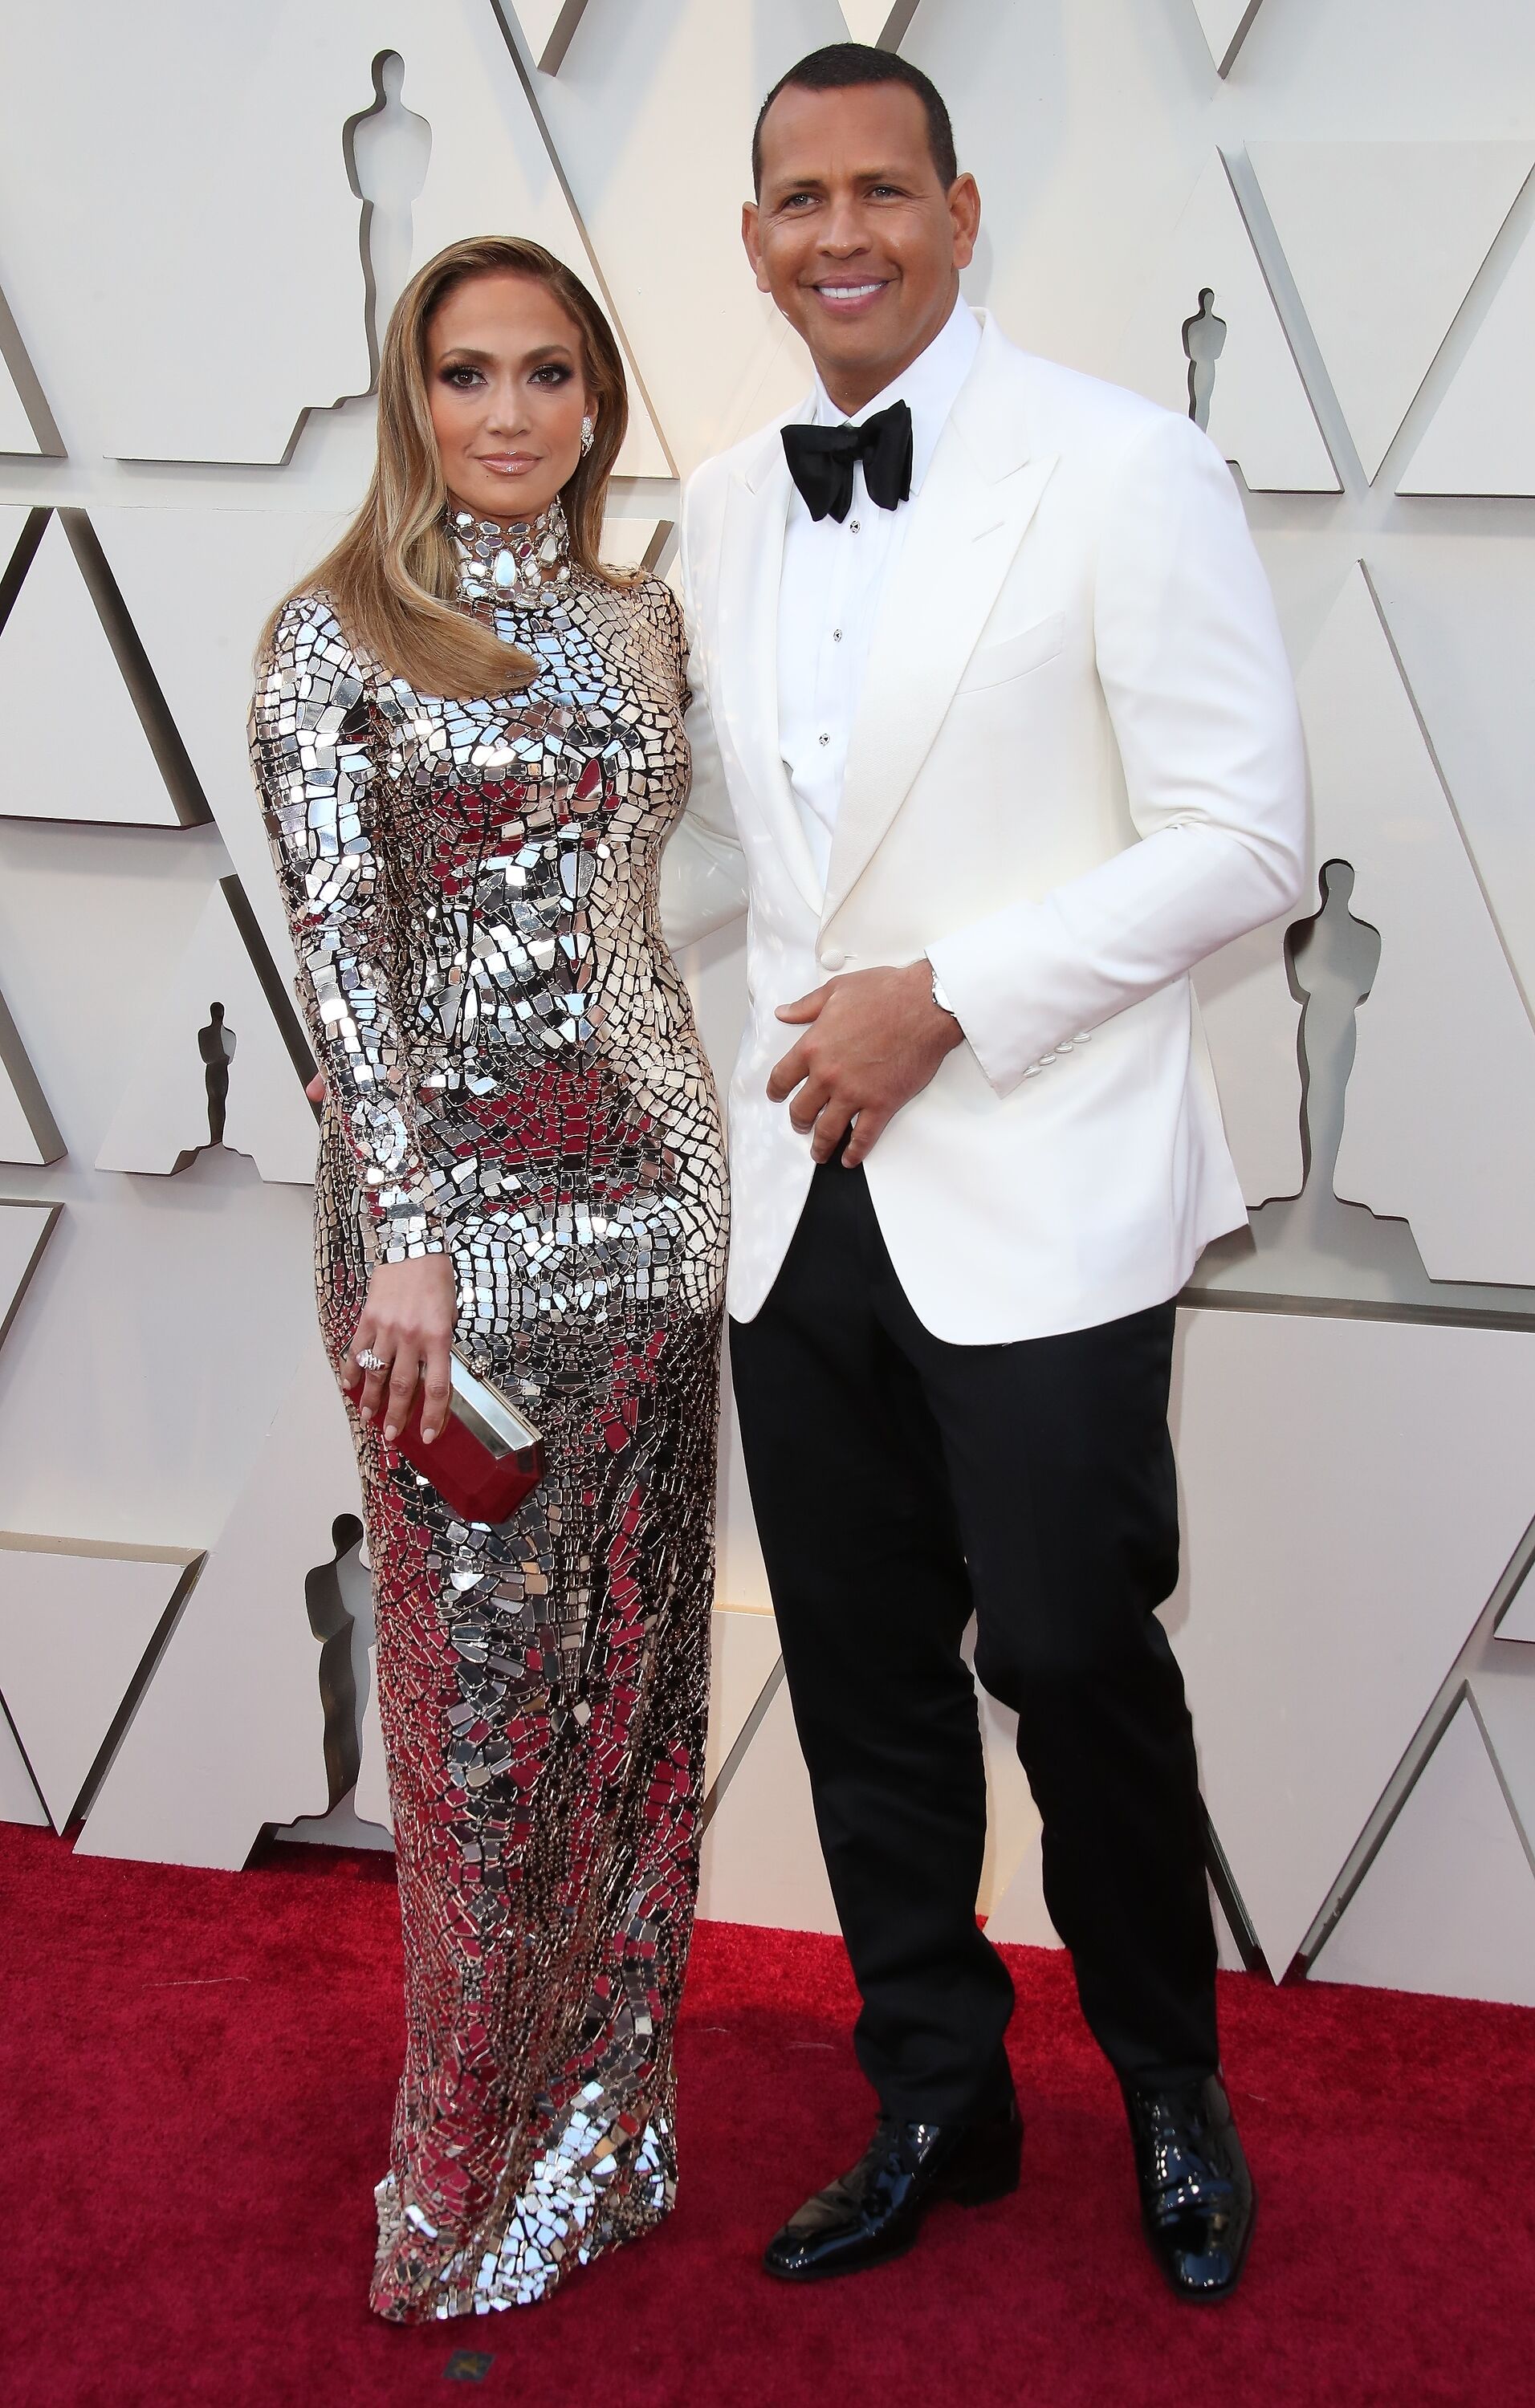  Alex Rodriguez and Jennifer Lopez at the 91st Annual Academy Awards on February 24, 2019 | Photo: Getty Images